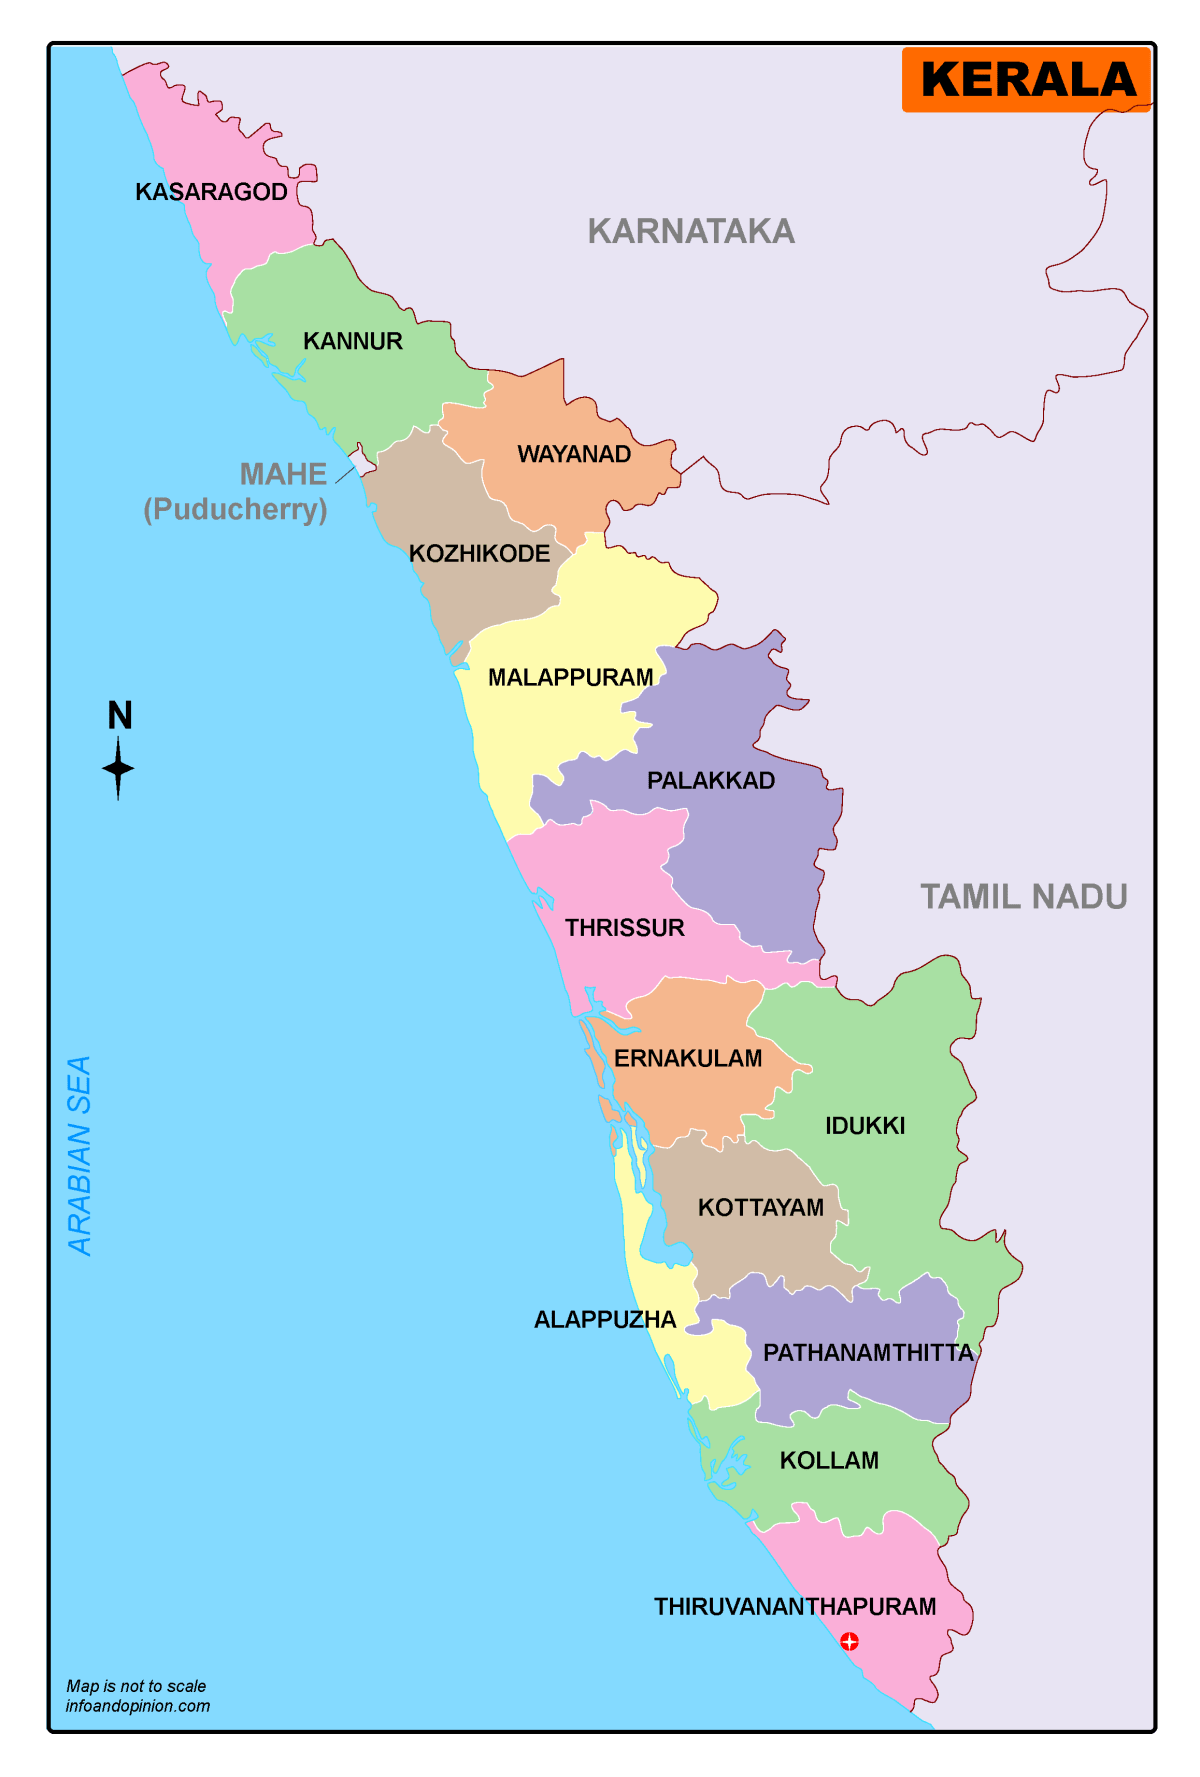 Kerala Map In Tamil, Tamil Nadu Map Map Of Tamil Nadu State Tamilnadu Districts Map Chennai Map, The state covers an area of 863 km², making it somewhat smaller than